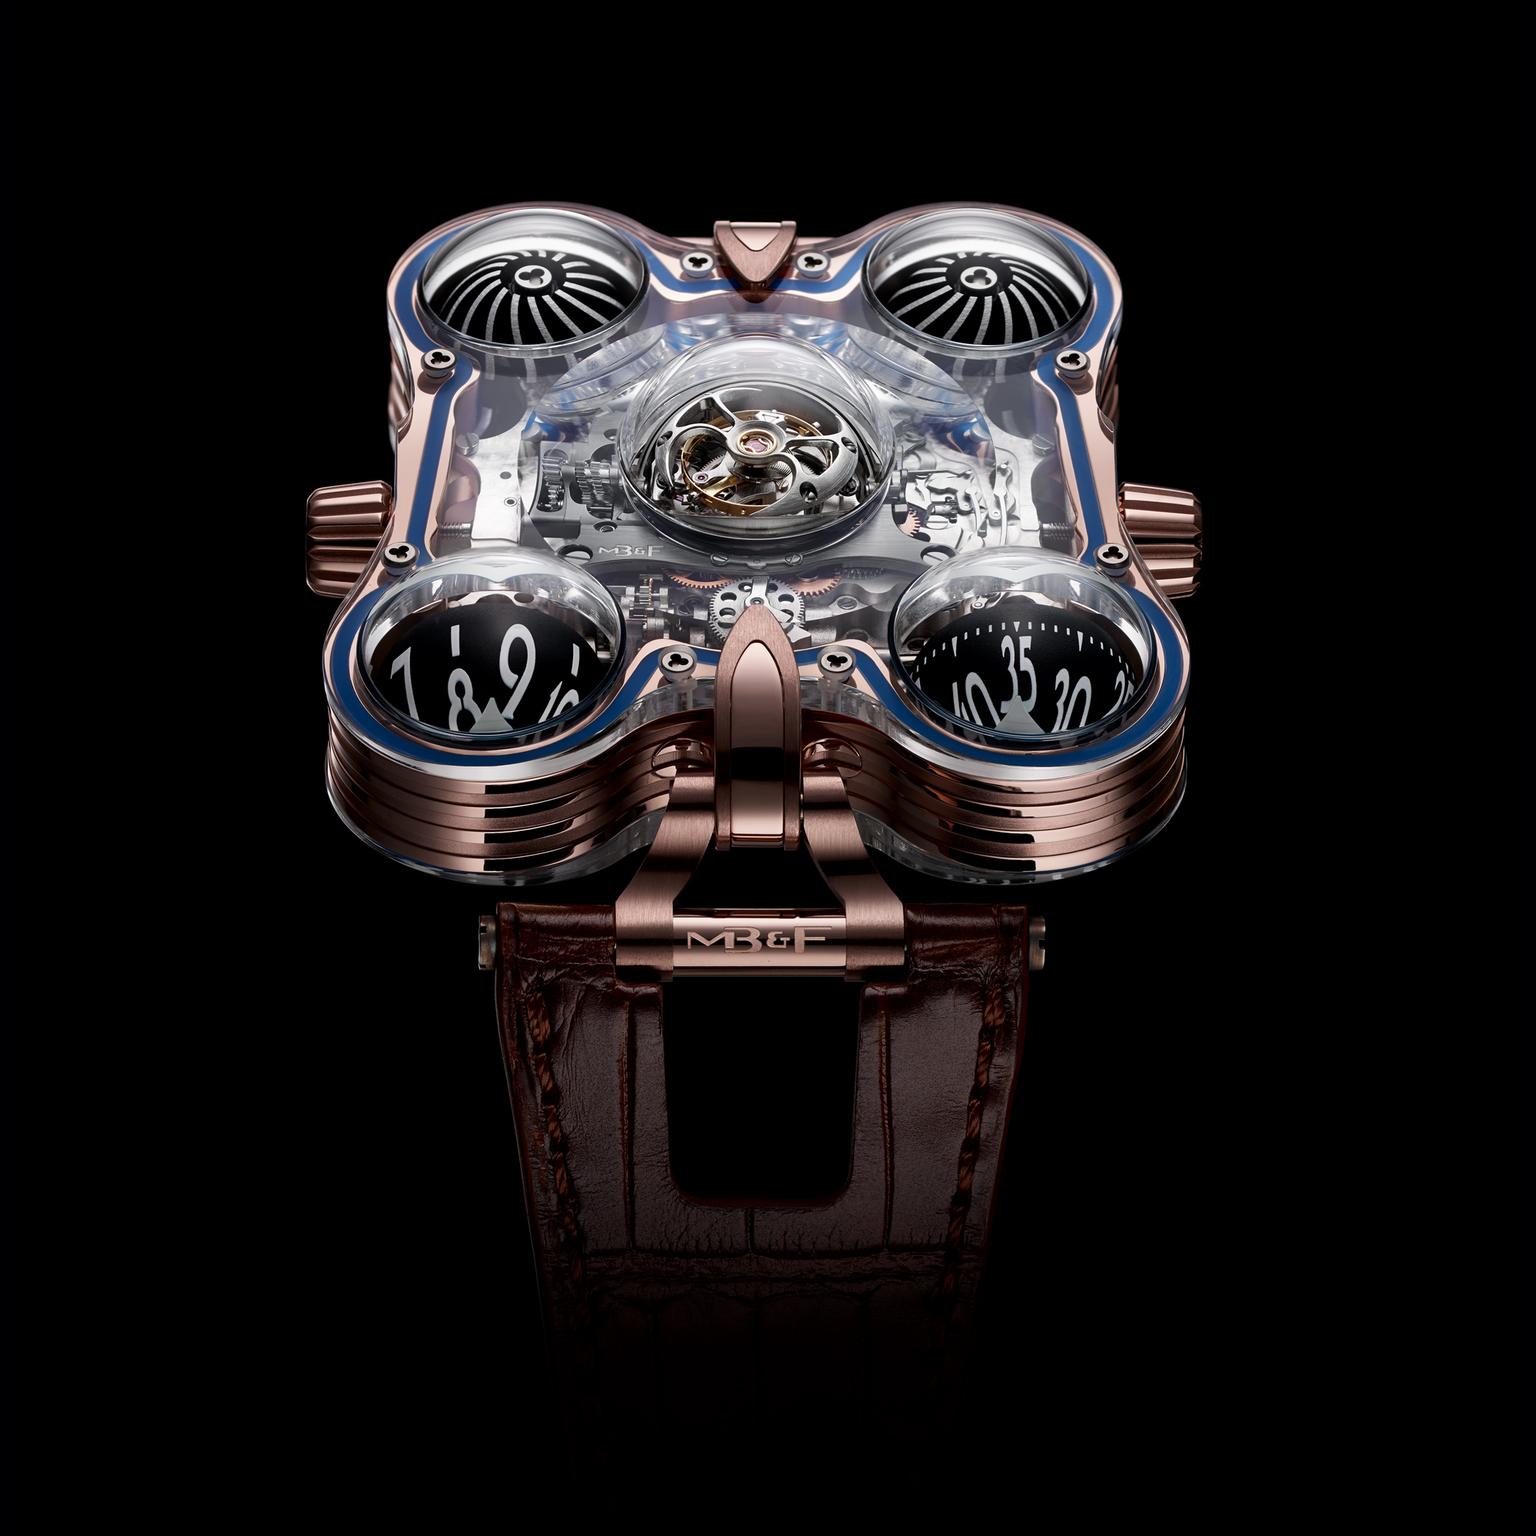 MB&F HM6 SV red gold watch